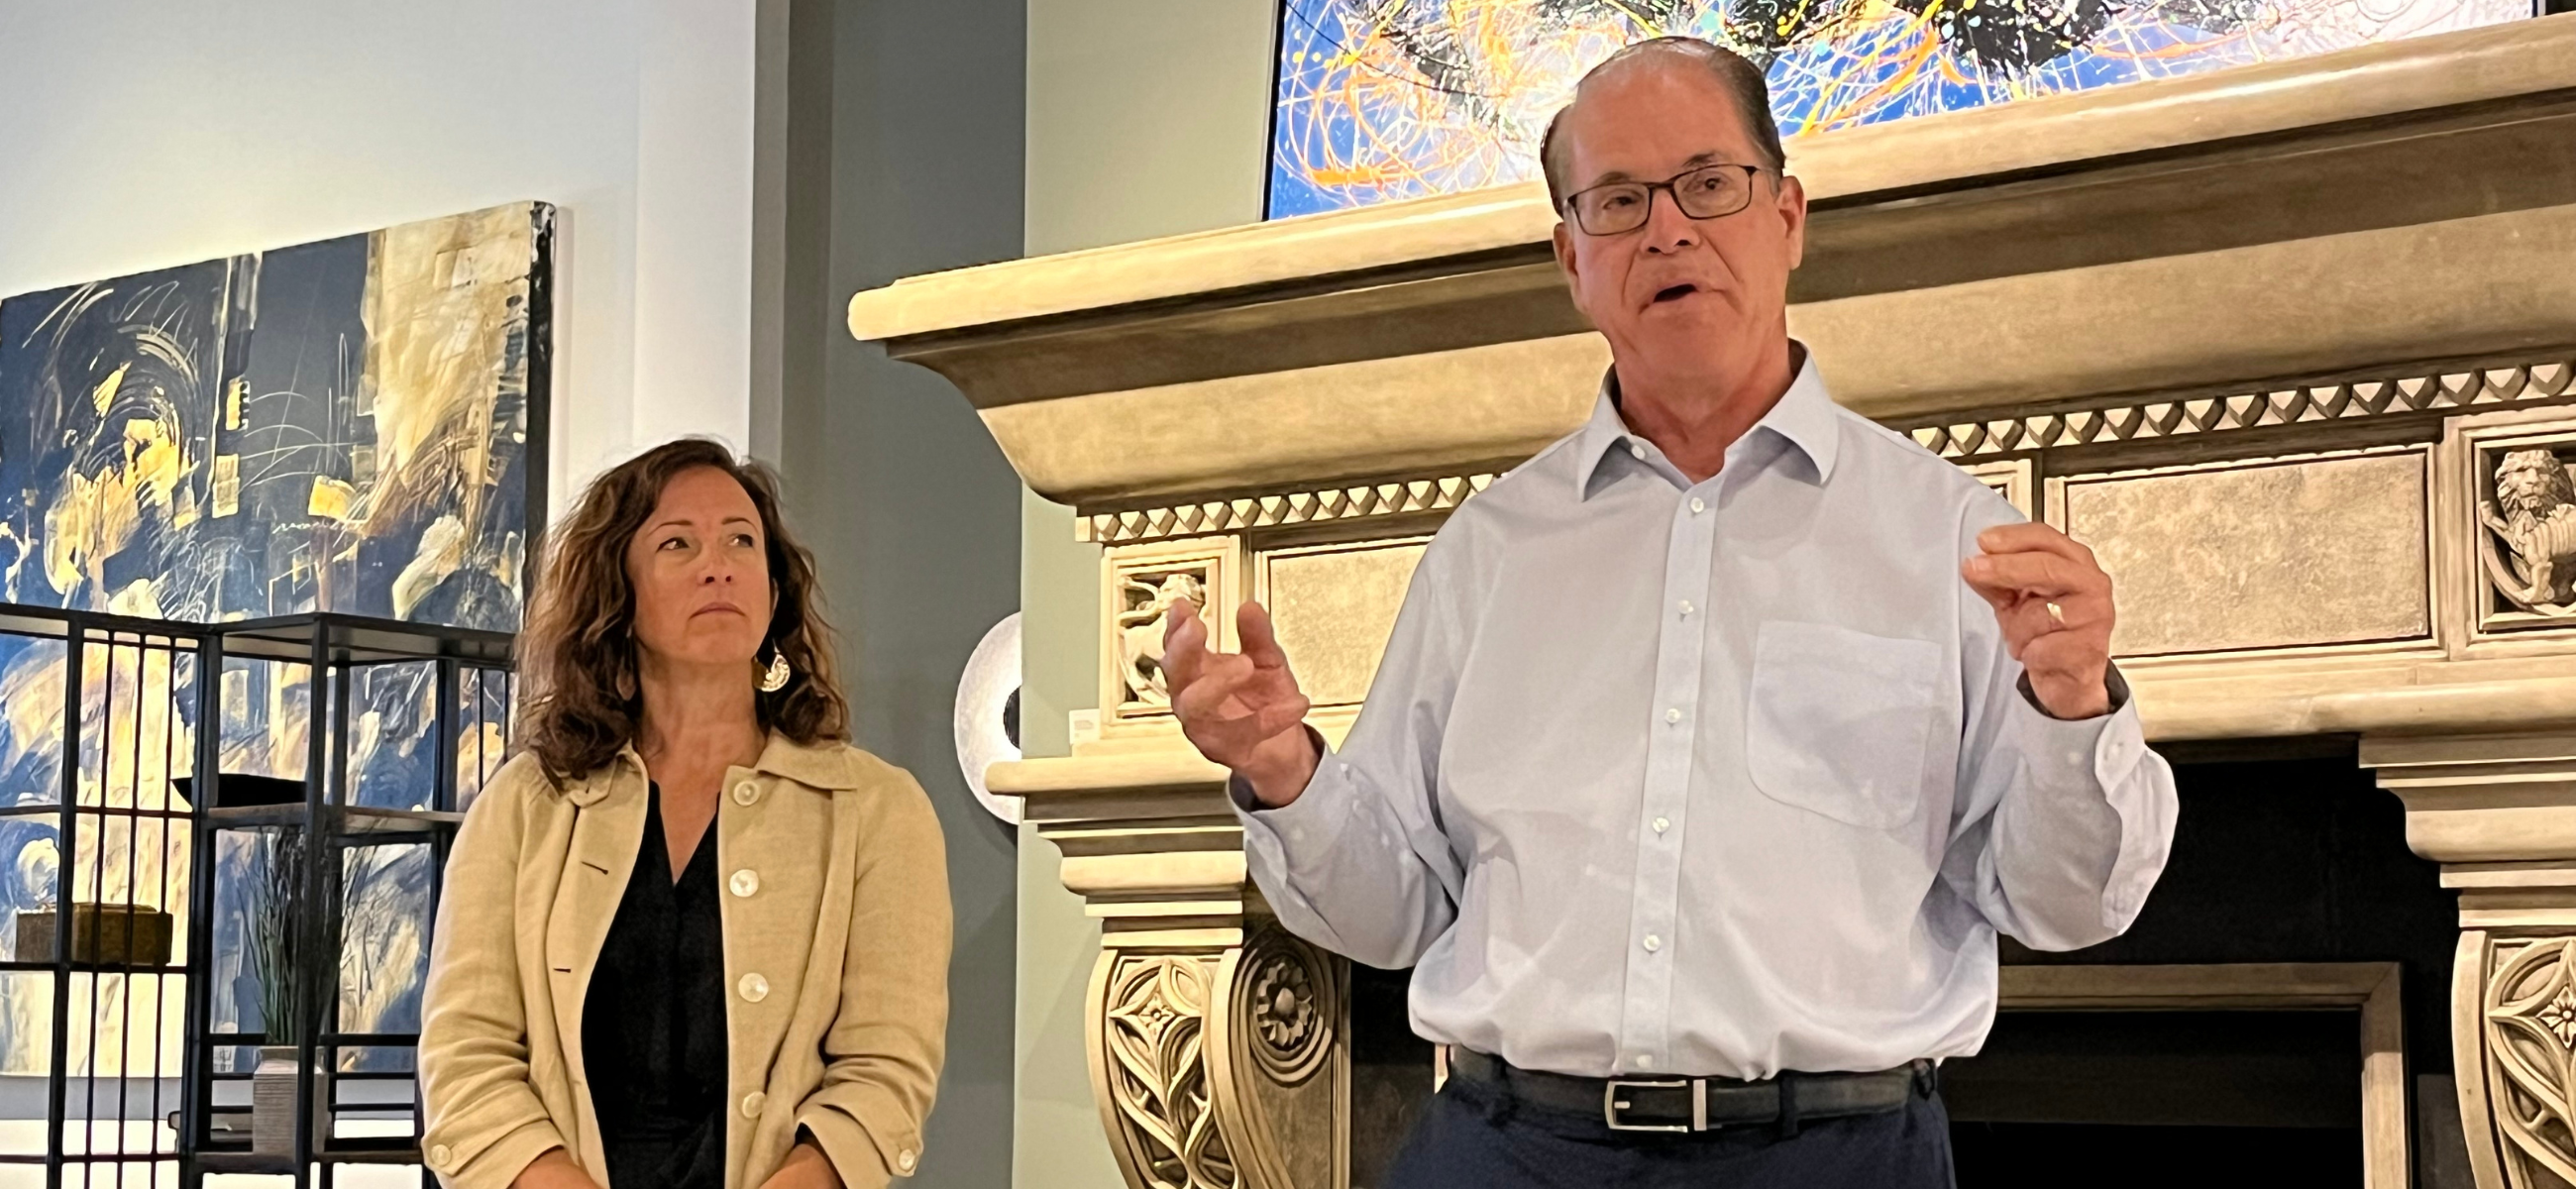 Republican gubernatorial candidate Mike Braun speaks alongside state Rep. Julie McGuire during a campaign event in Carmel on Tuesday, June 11, 2024. (Credit: Tom Davies)